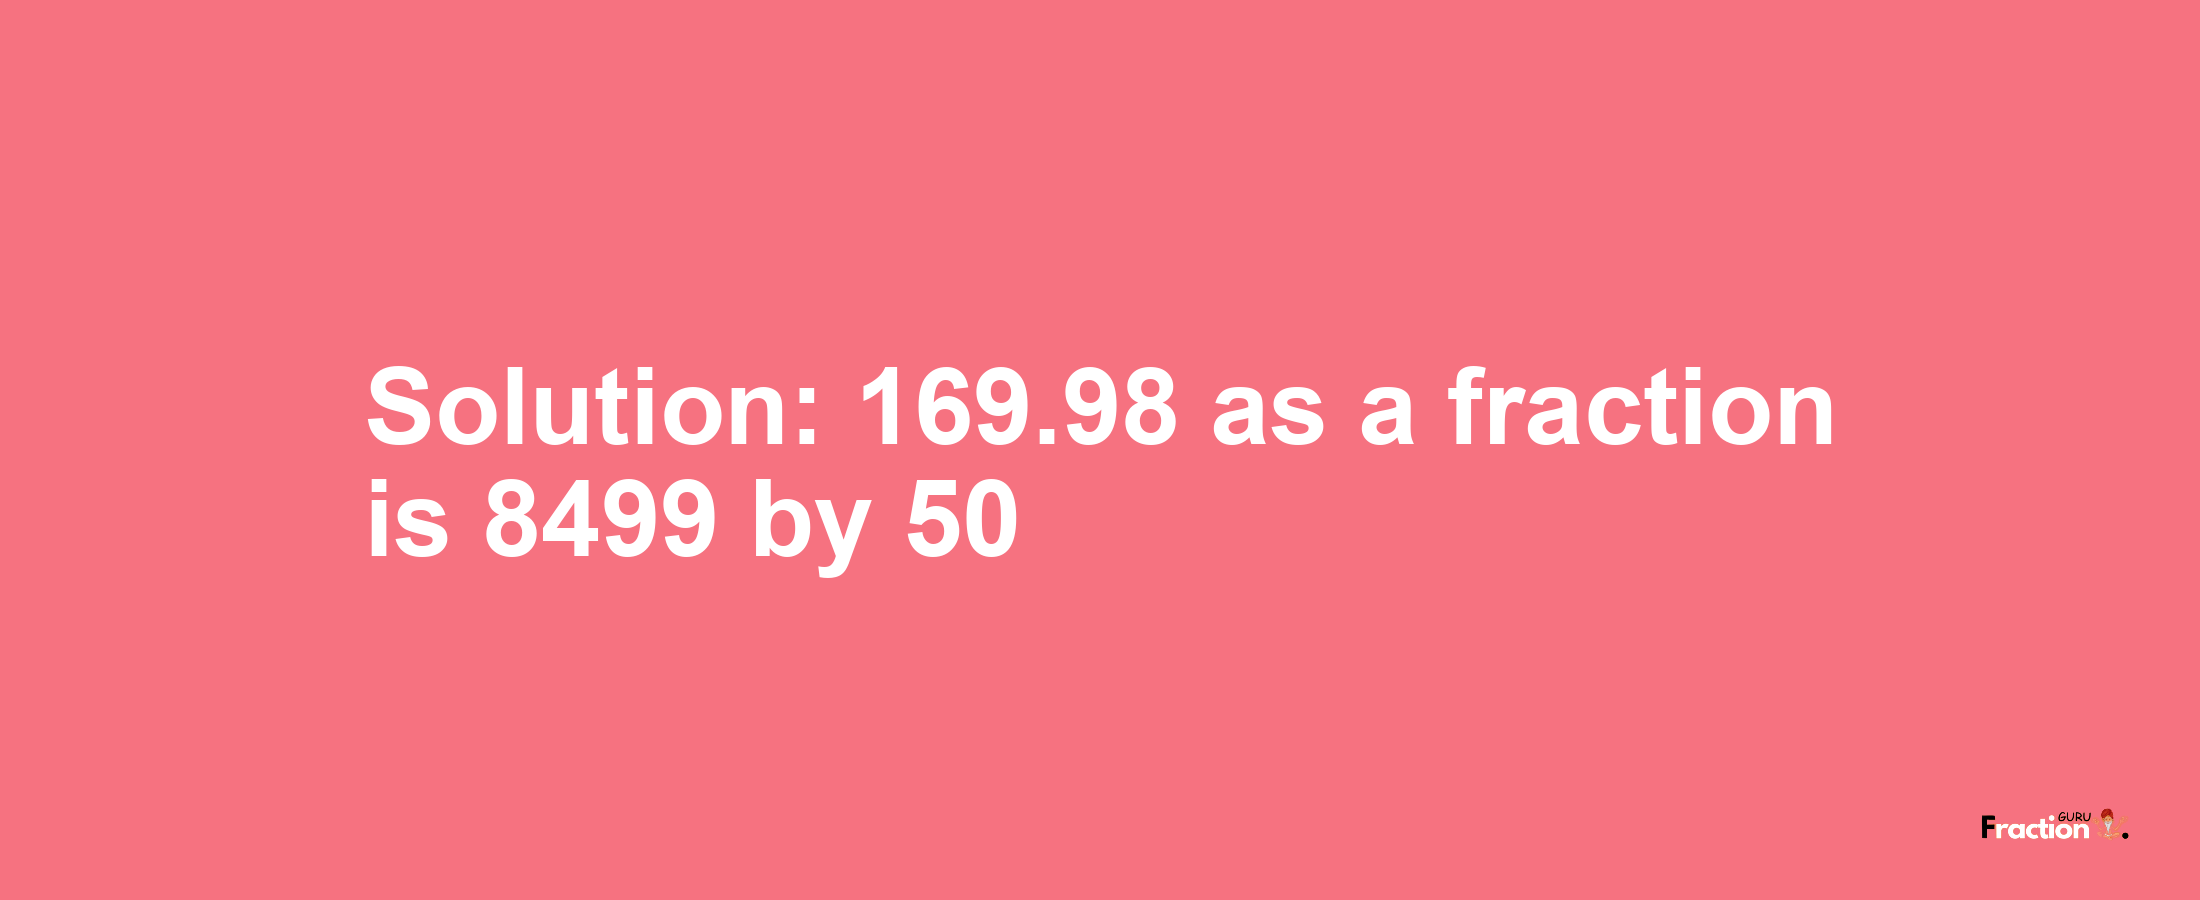 Solution:169.98 as a fraction is 8499/50